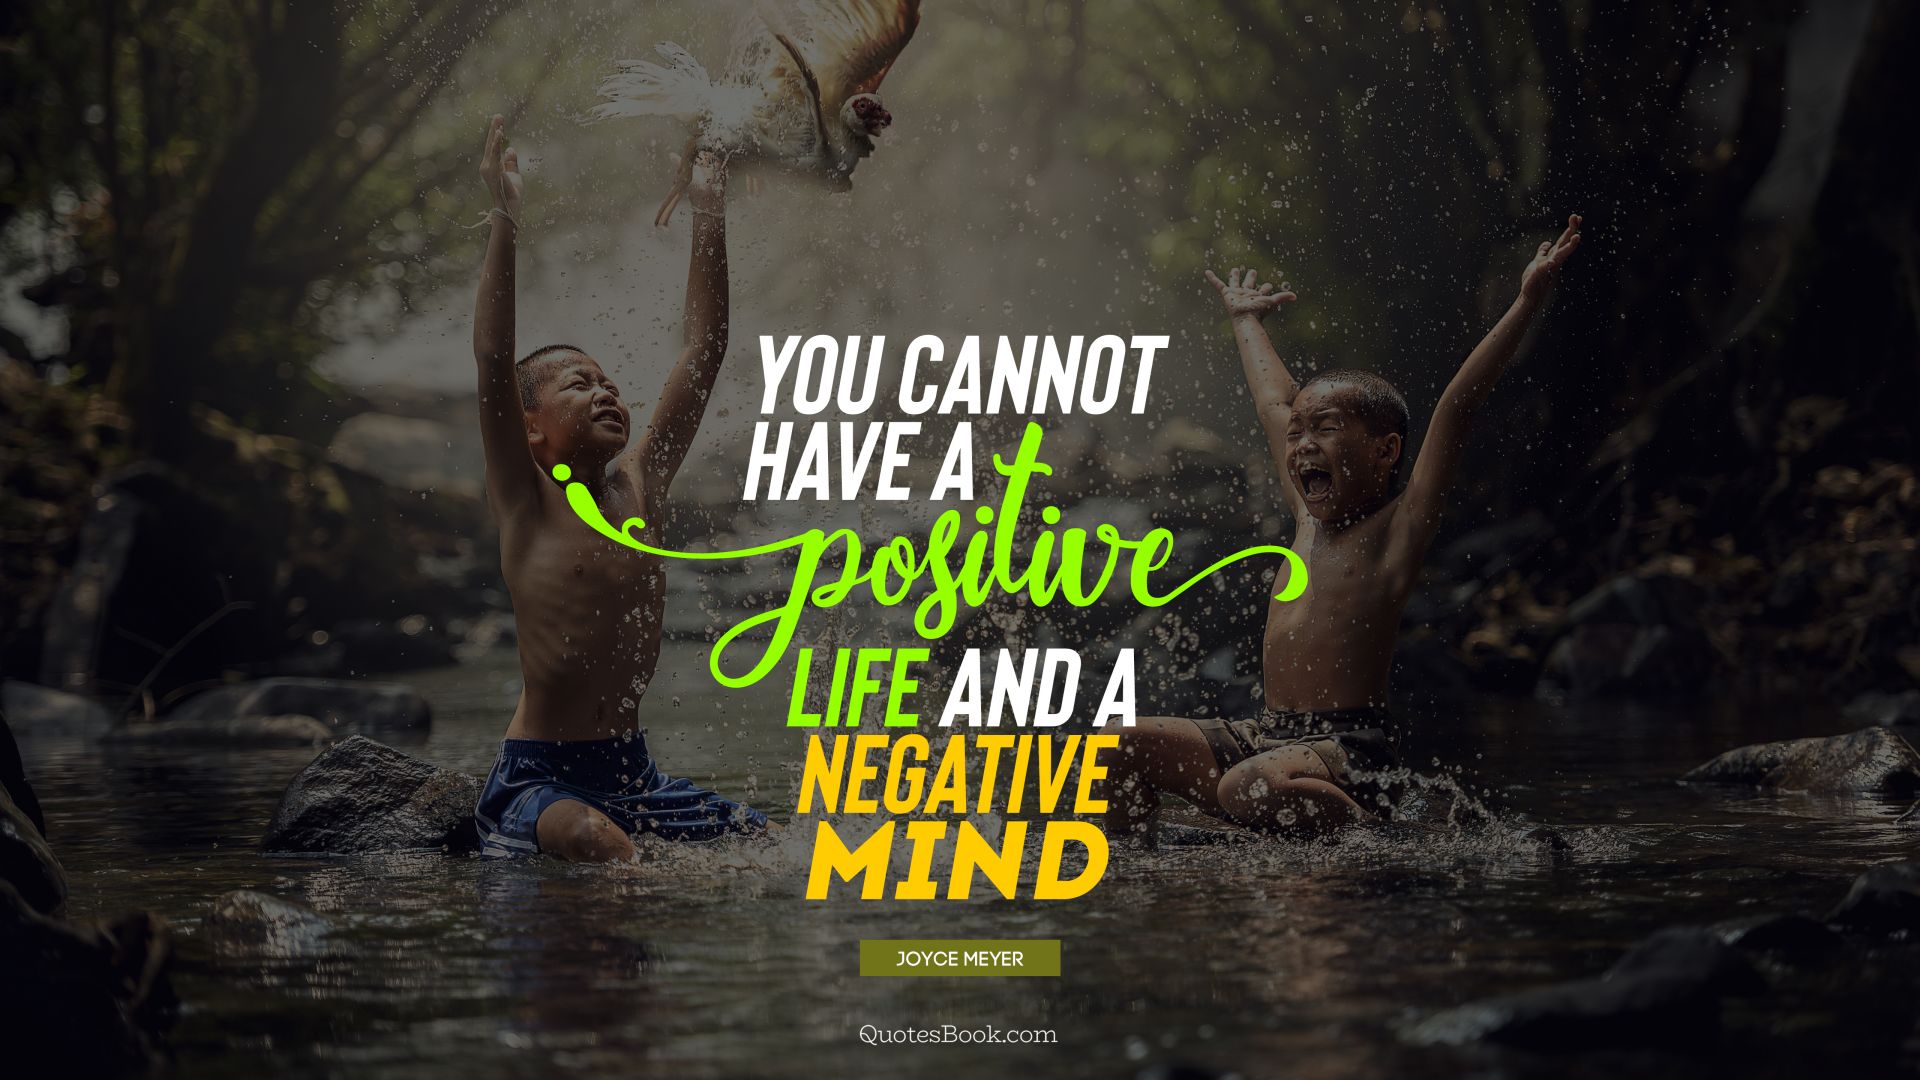 You cannot have a positive life and a negative mind. - Quote by Joyce Meyer